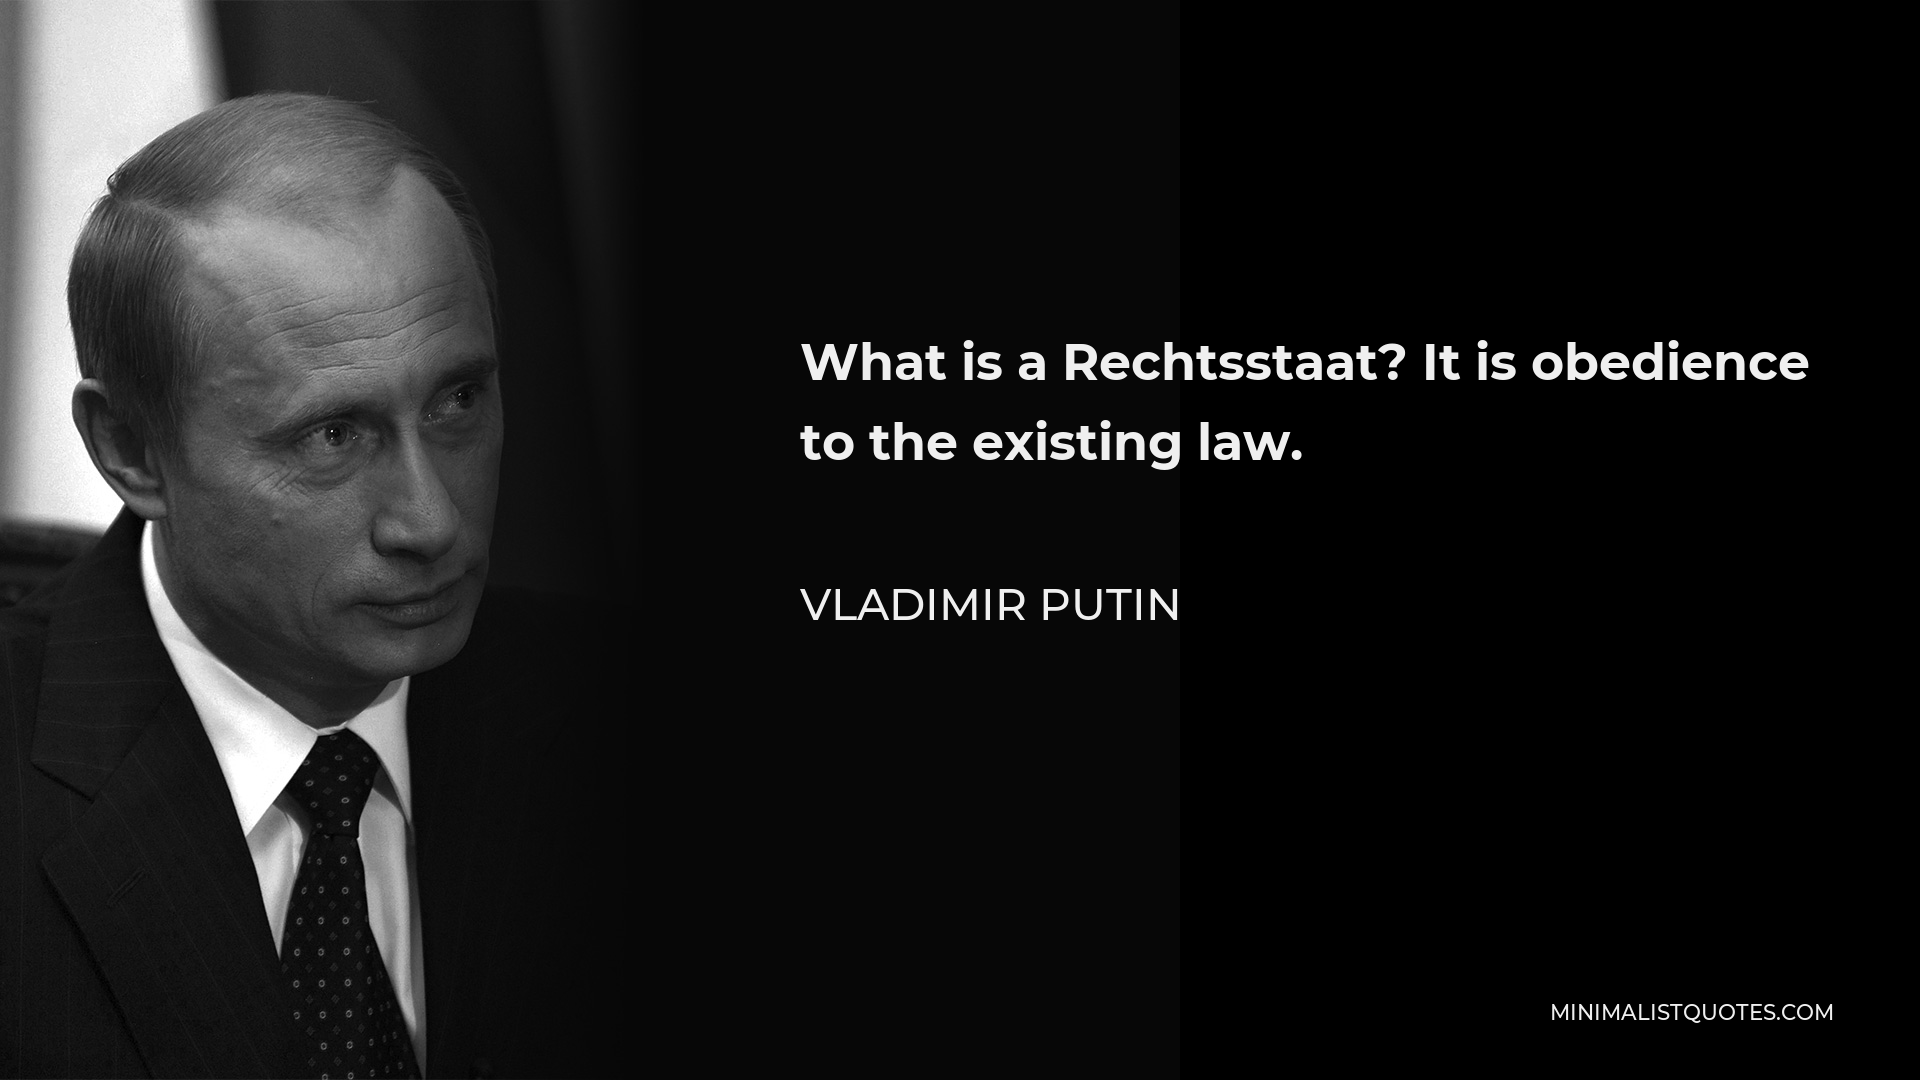 Vladimir Putin Quote - What is a Rechtsstaat? It is obedience to the existing law.